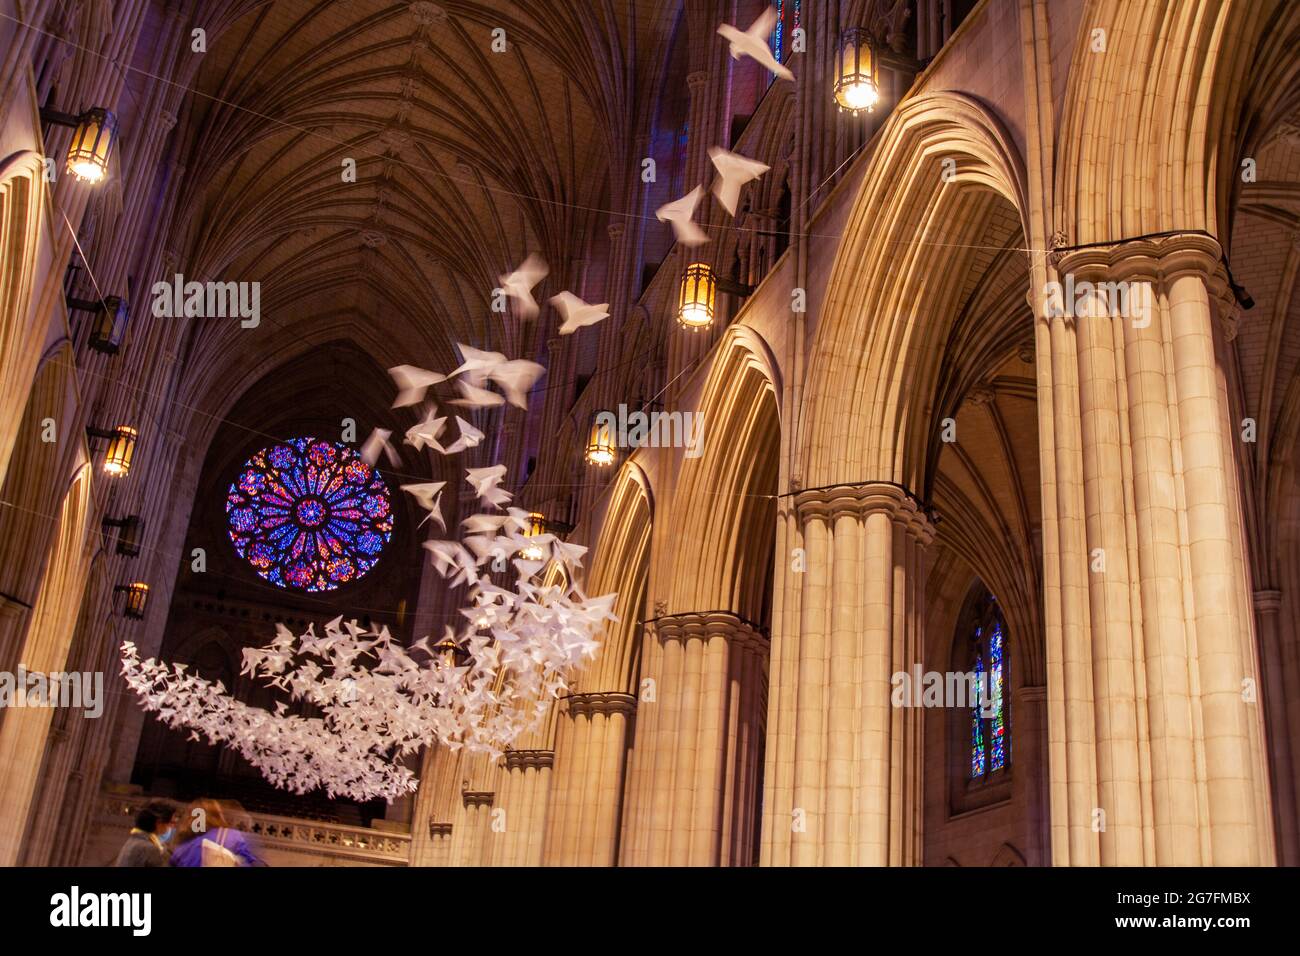 Michael Pendry’s “Les Colombes” (the Doves) art installation of 2,000 origami doves at the Washington National Cathedral in Washington, DC - July 2021 Stock Photo